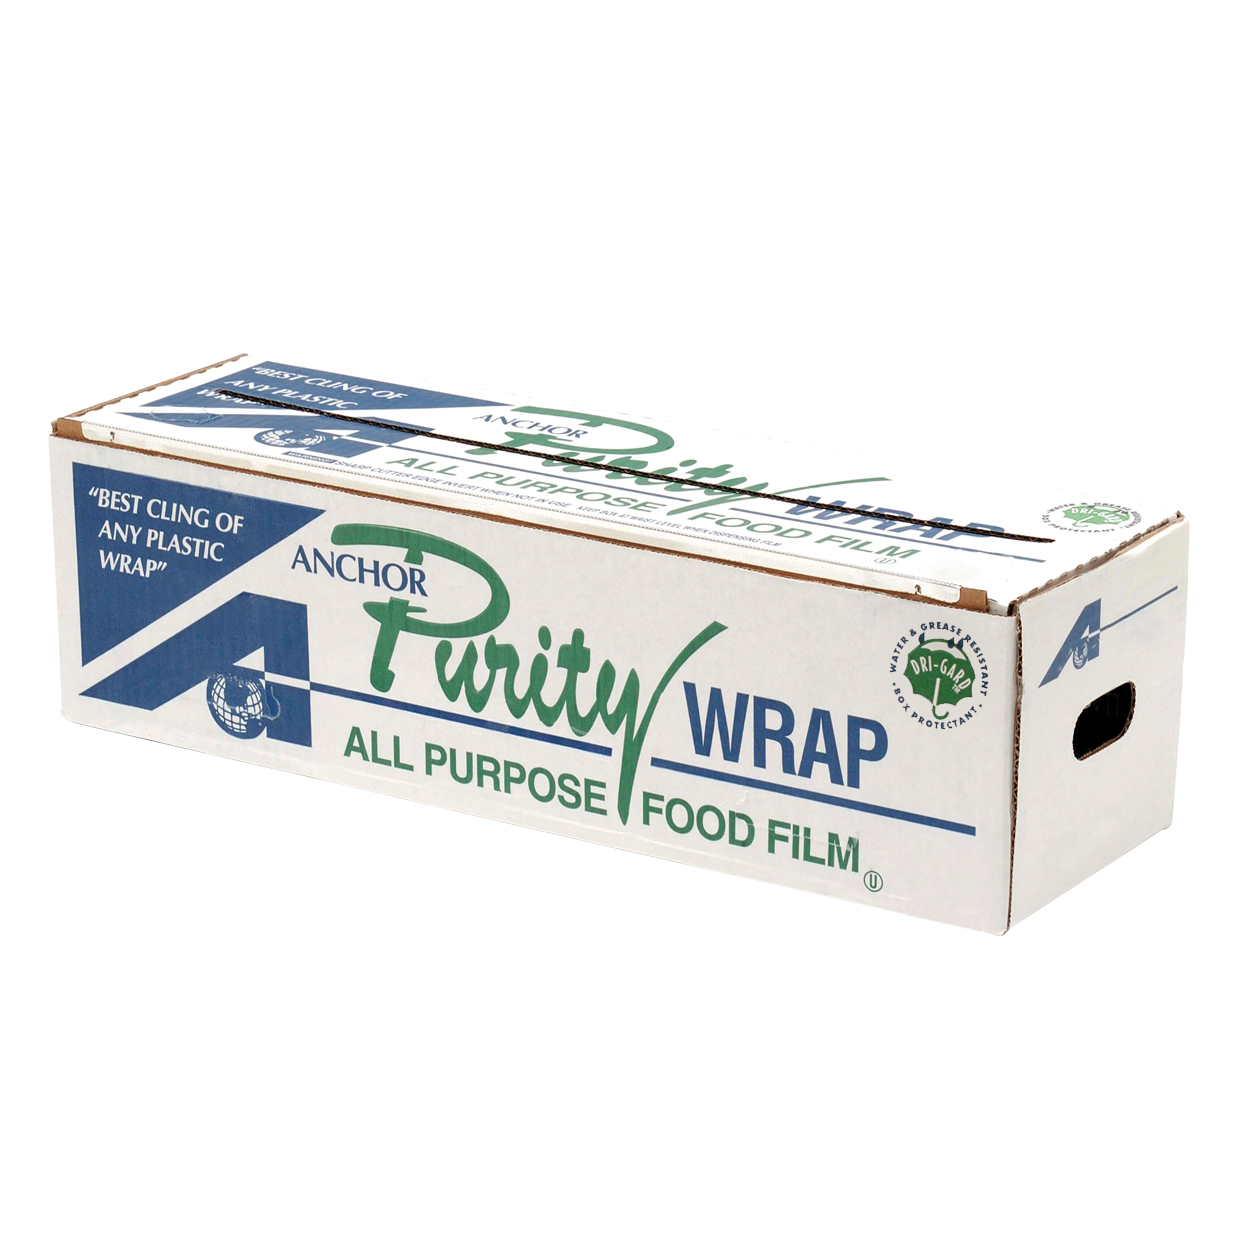 18*2M Anchor-Purity Wrap
[#PW182]